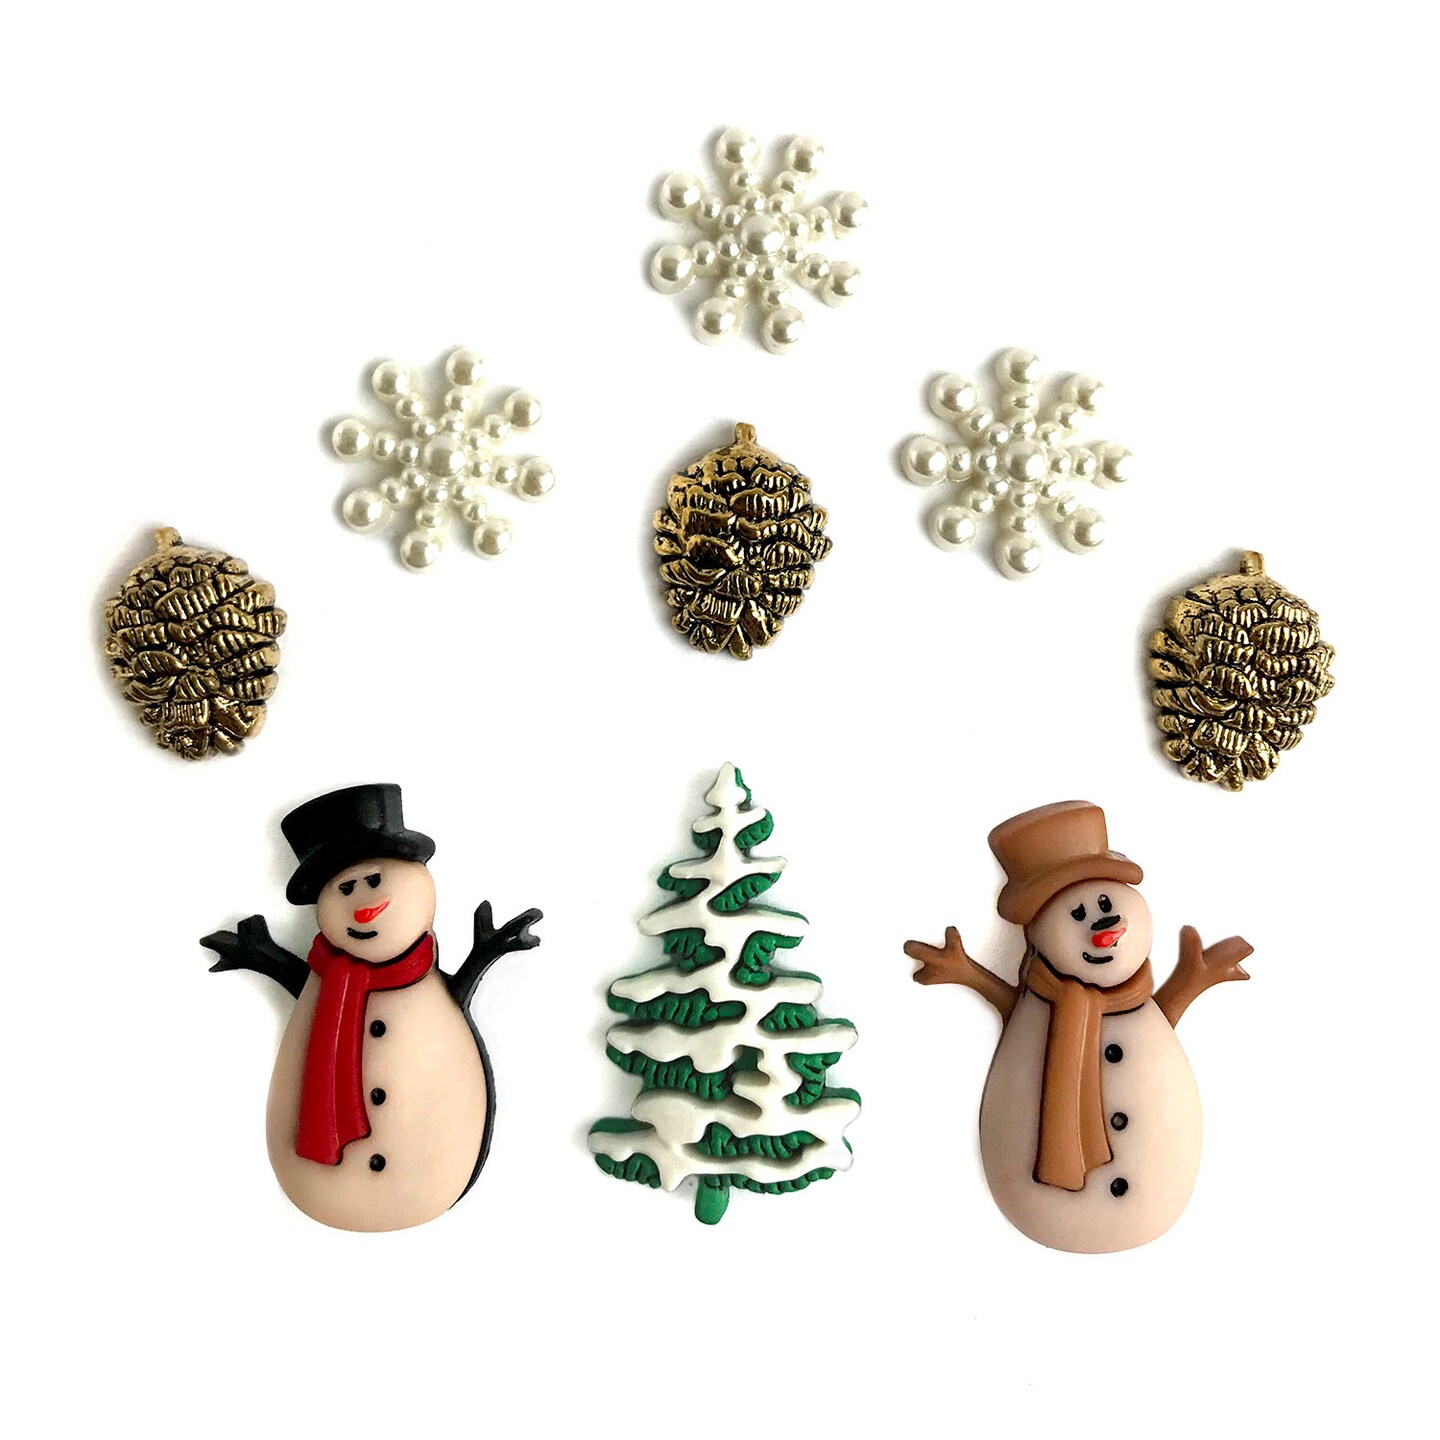 100pcs Christmas Santa Claus Christmas Tree Snowman Buttons Sewing Craft  Wooden Buttons Assorted Buttons for Crafts Sewing Decor - AliExpress